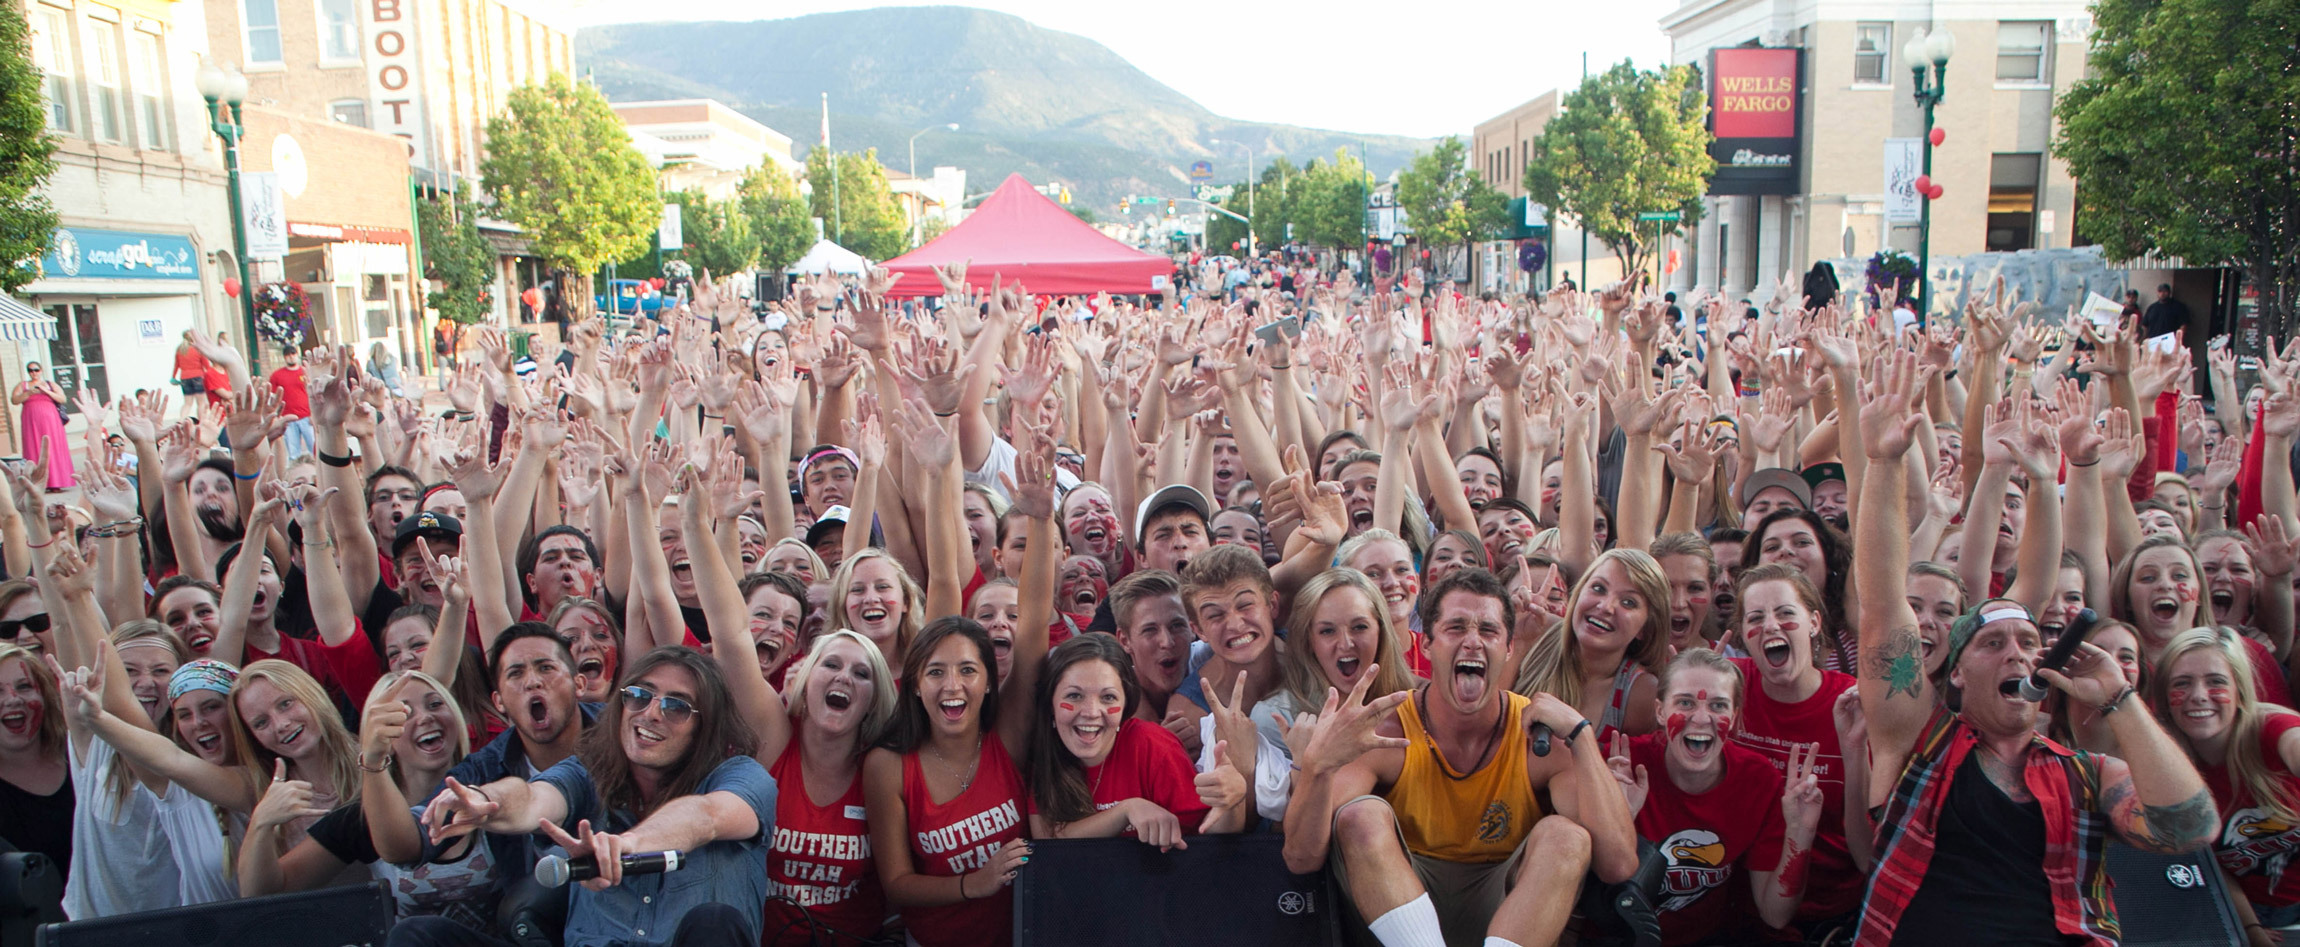 SUU's student event, Paint the Town red